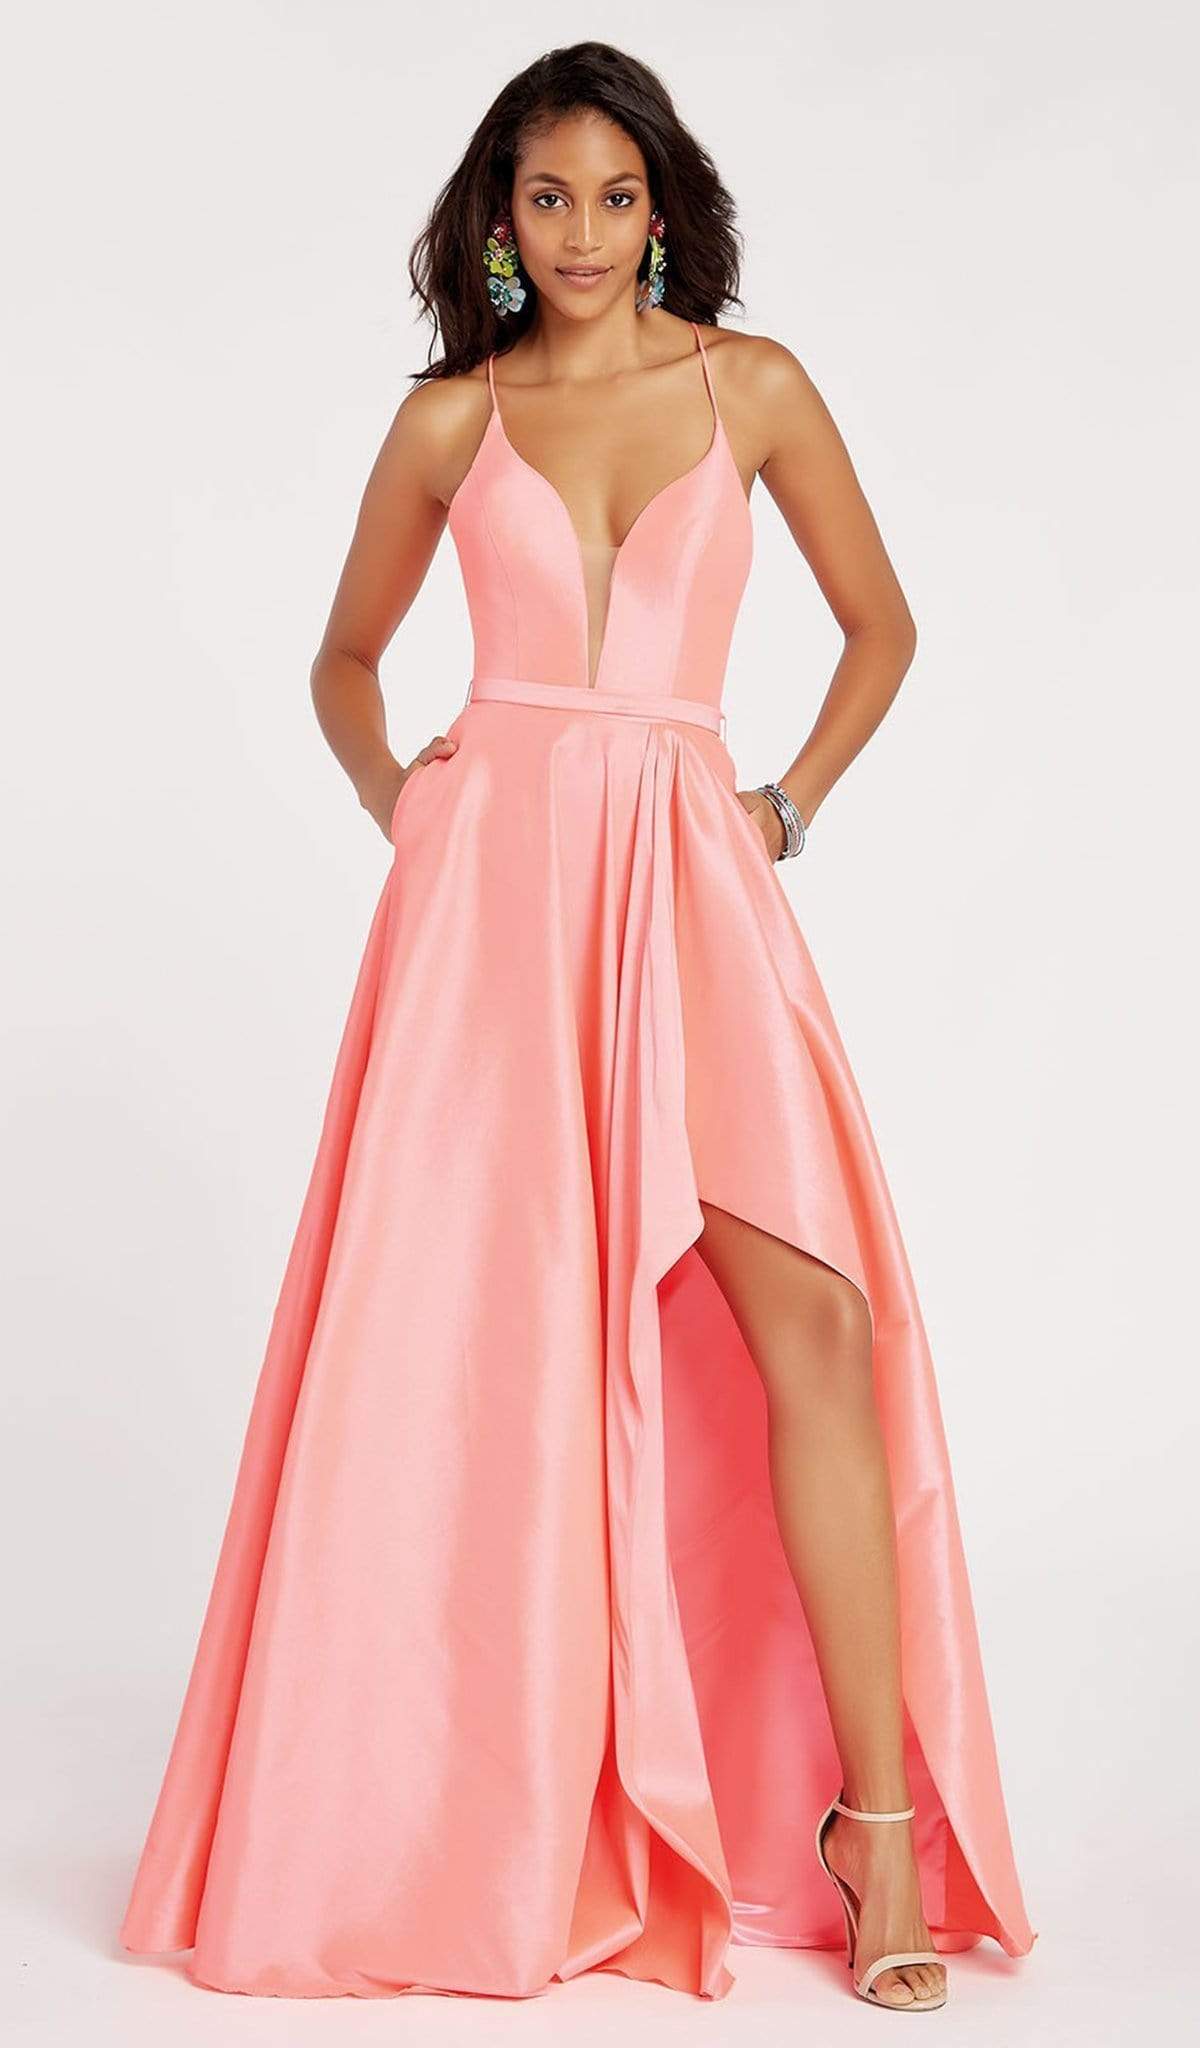 Alyce Paris - 60394 Illusion Plunging Neck High-Low Taffeta Prom Dress Special Occasion Dress 00 / New Coral